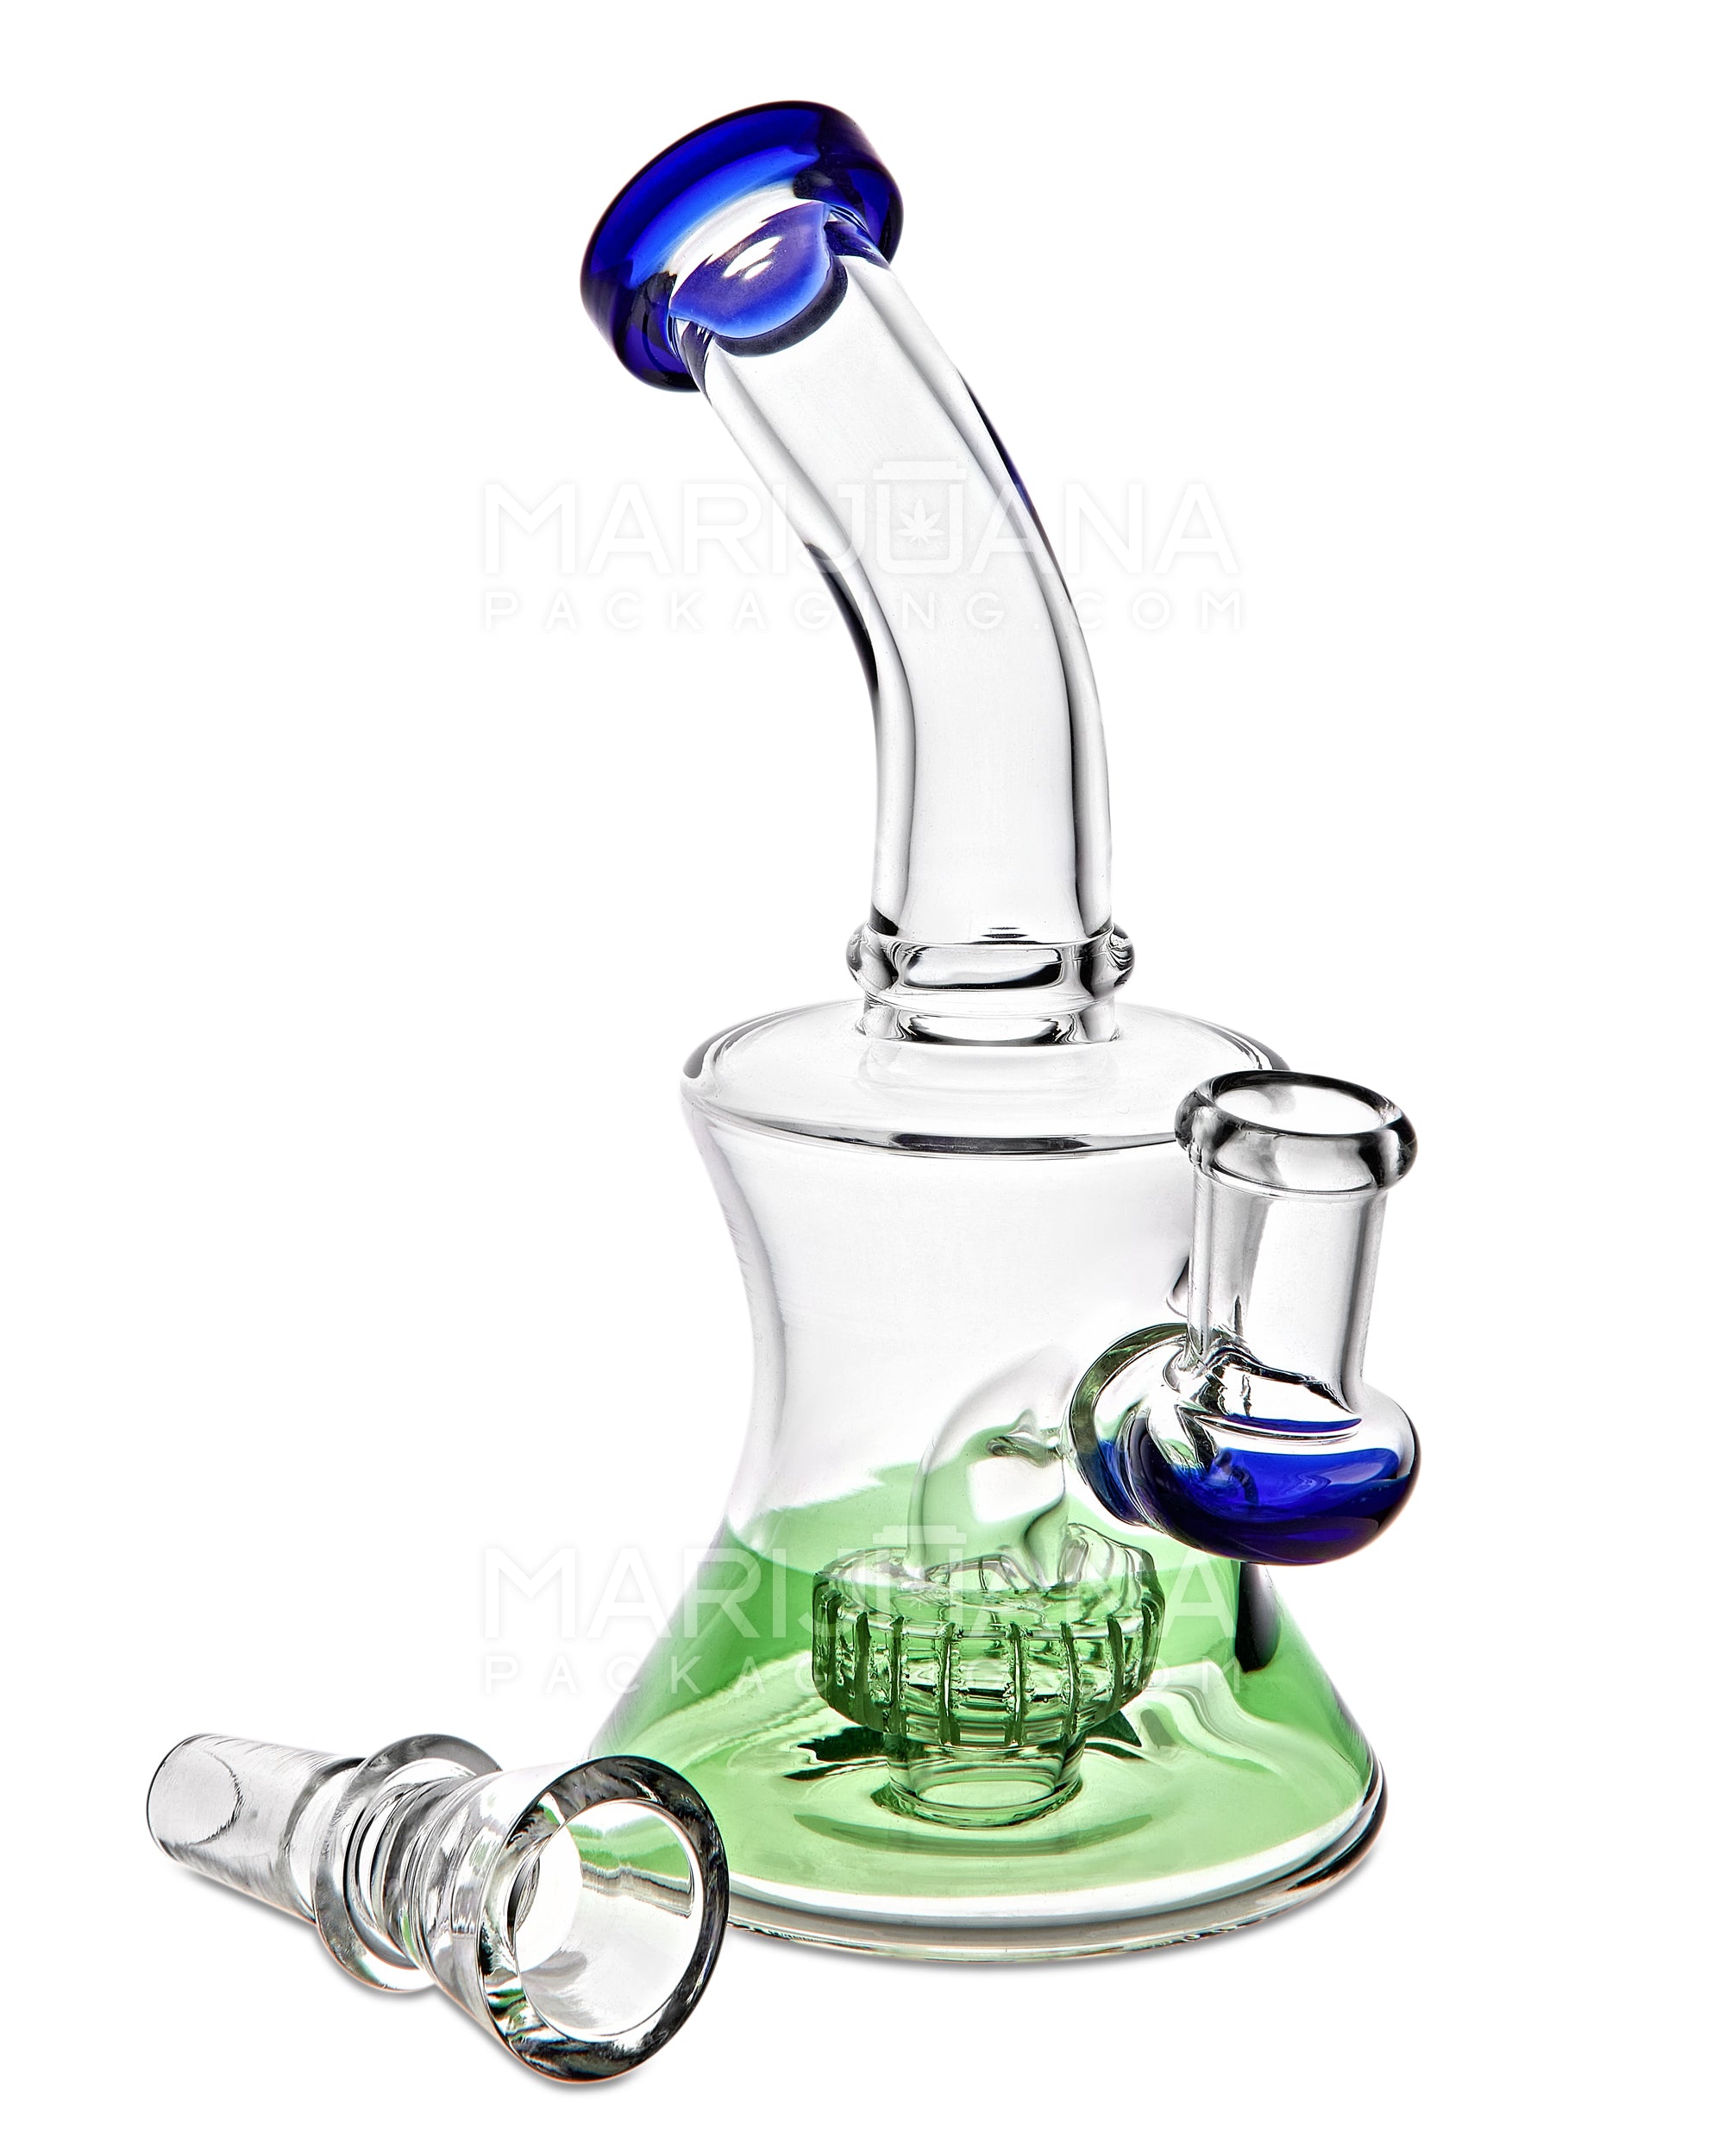 Bent Neck Showerhead Perc Glass Bell Water Pipe | 6.5in Tall - 14mm Bowl - Blue & Green - 2